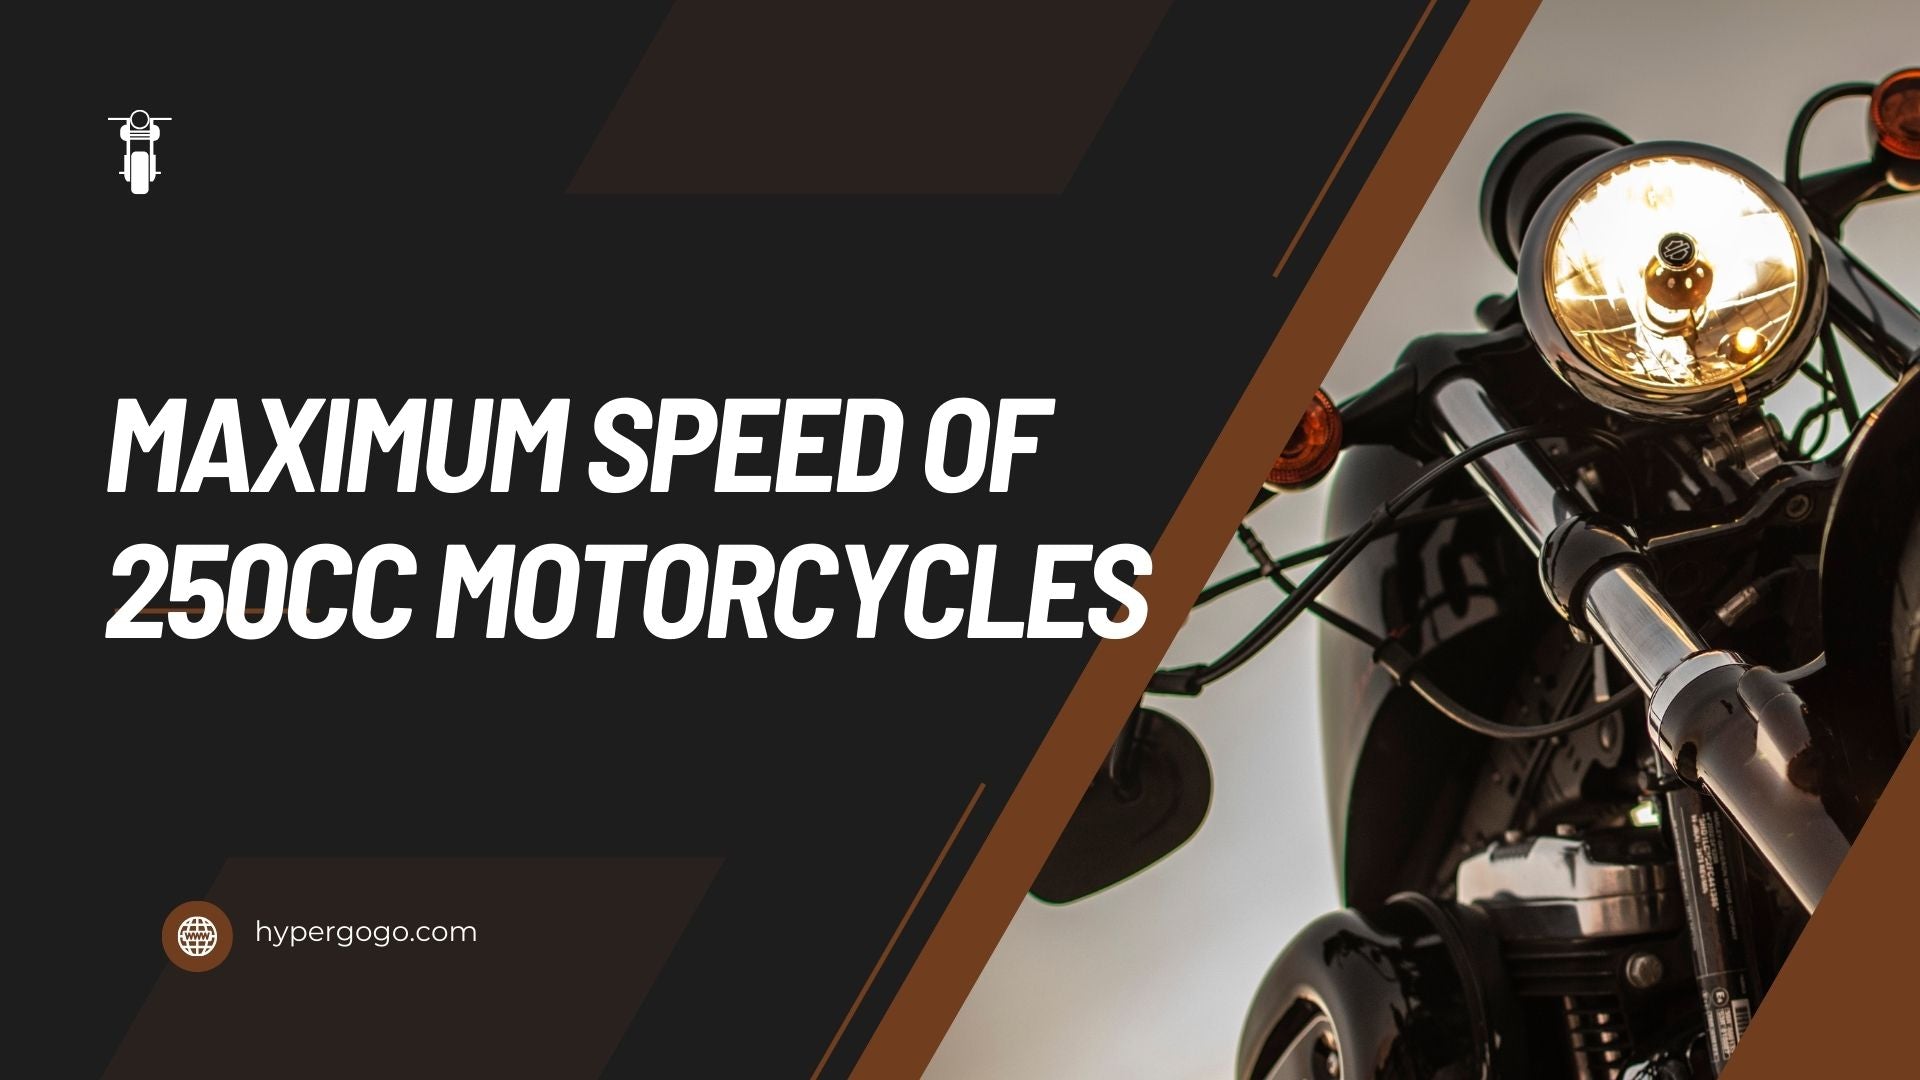 What is the Maximum Speed of 250cc Motorcycles?